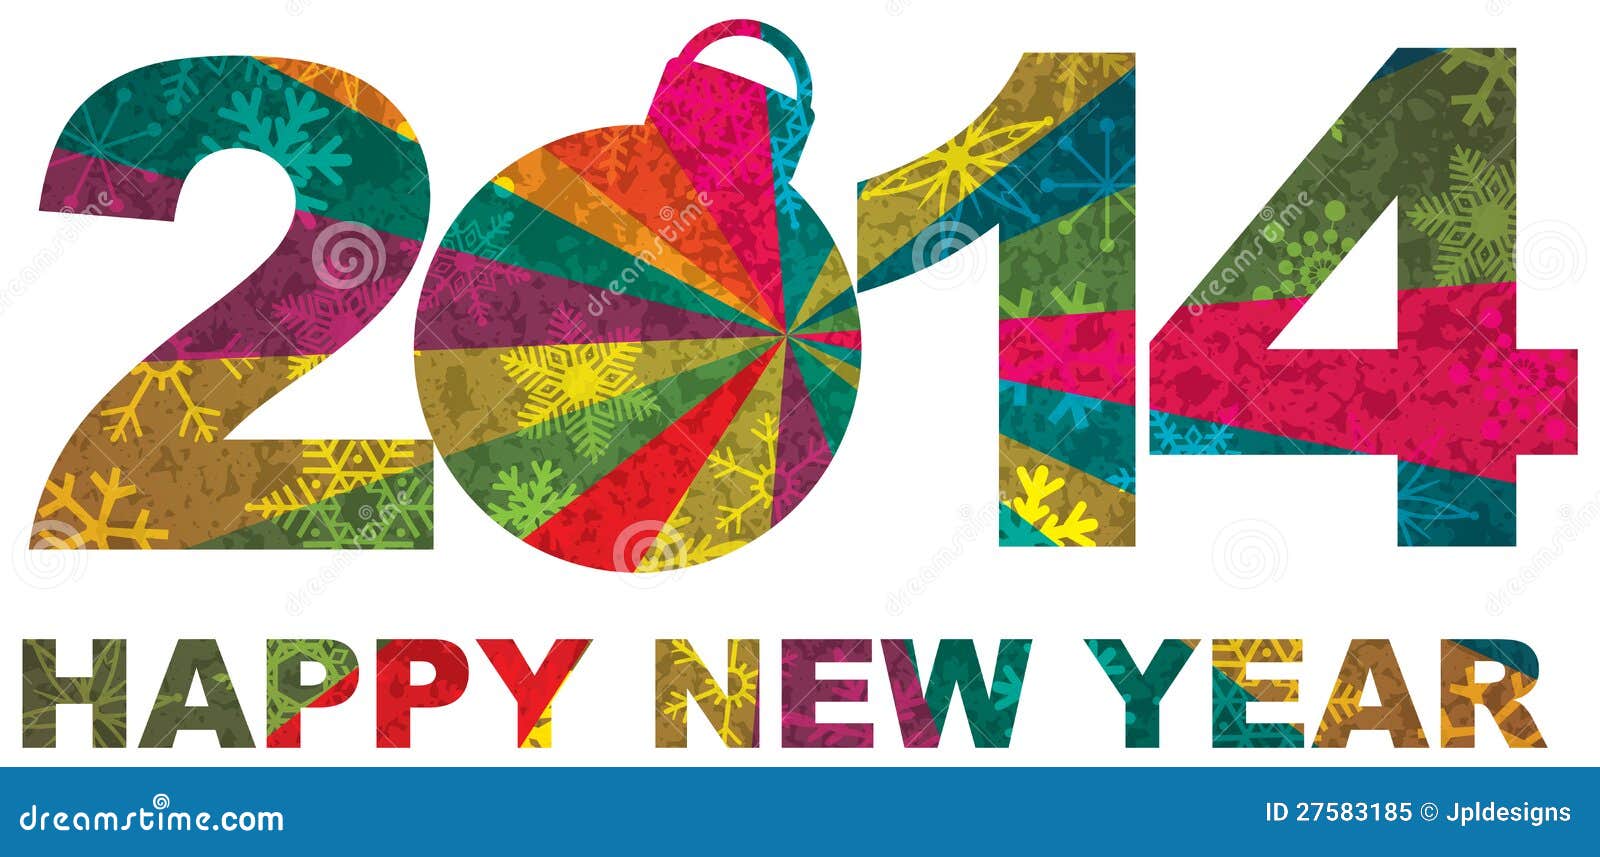 happy new year 2014 clipart for facebook - photo #33